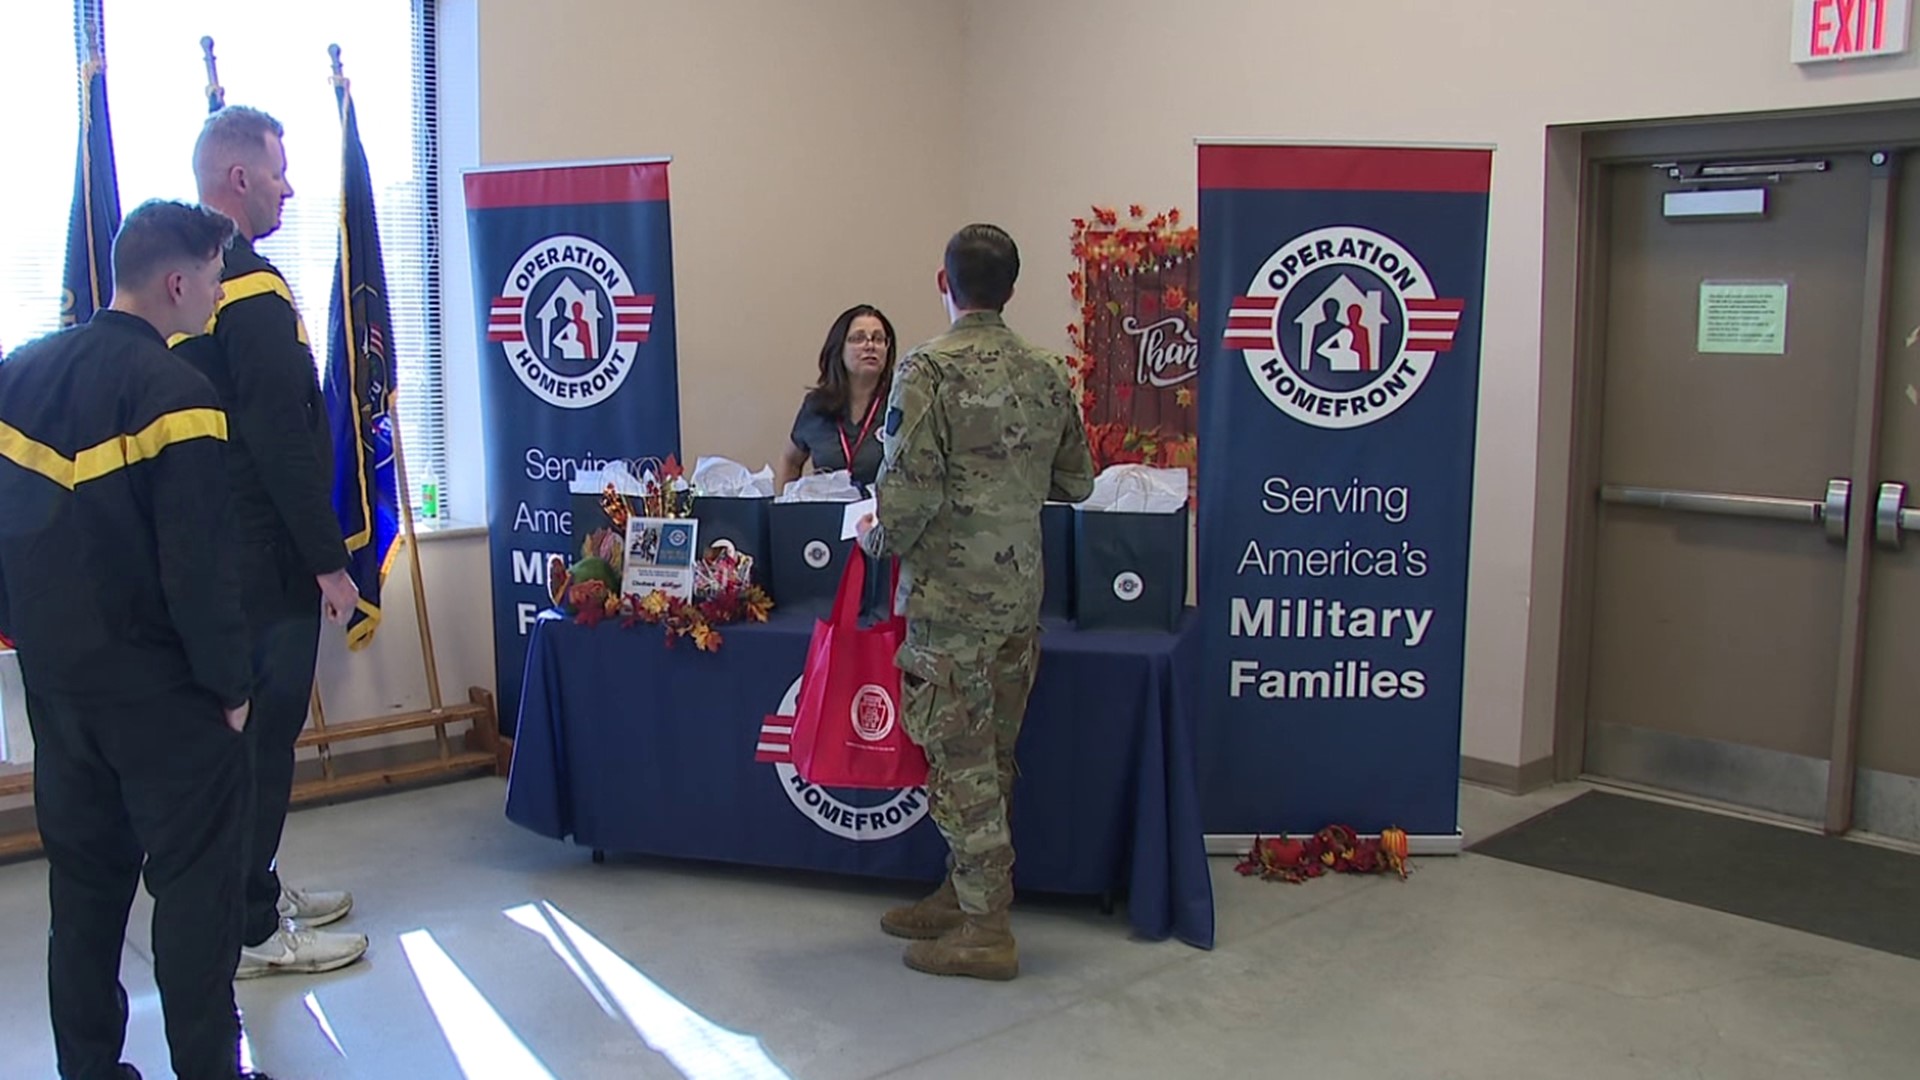 A nonprofit gave out gift cards for holiday meals for service members in Scranton on Sunday.